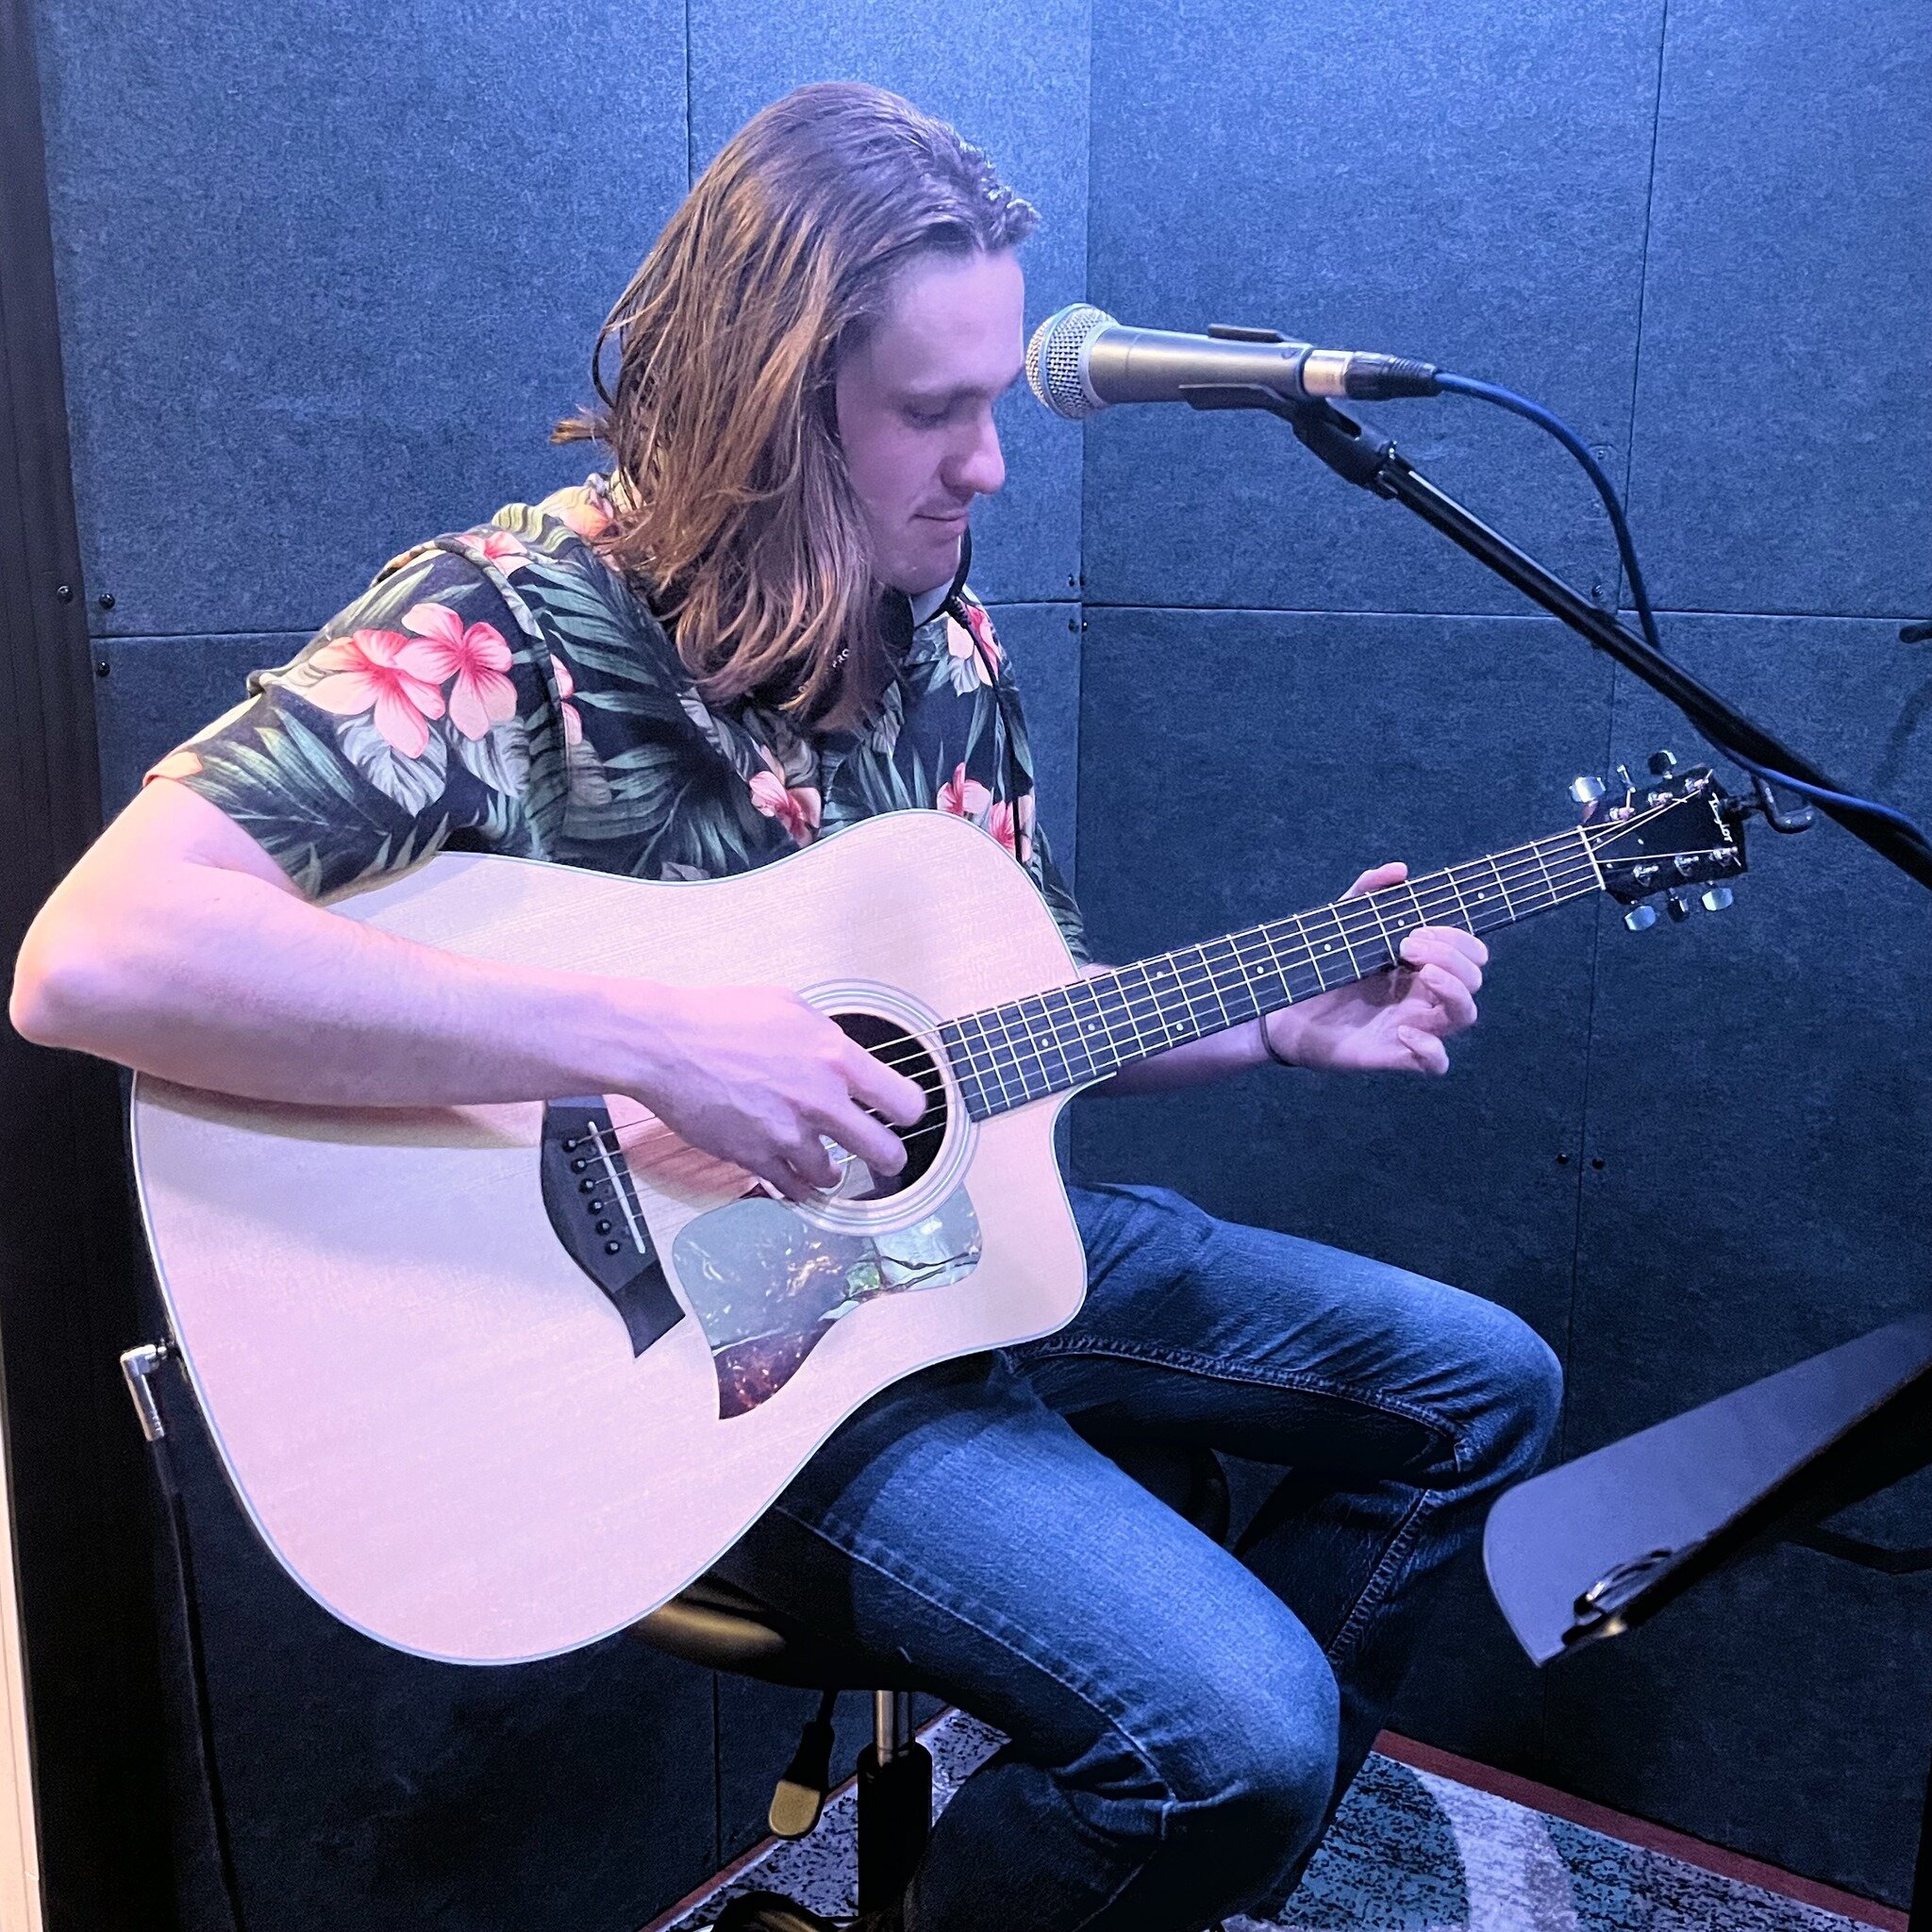 First session with @brandonsummers80!

Link in bio &gt;&gt;
.
.
.
#hiddencreekmusic #musicproducer #musicproduction #musicstudio #recordingstudio #recordingstudio #bellevuetn #nashville #nashvilletn #nashvillemusic #nashvilletennessee #nashvillesmall